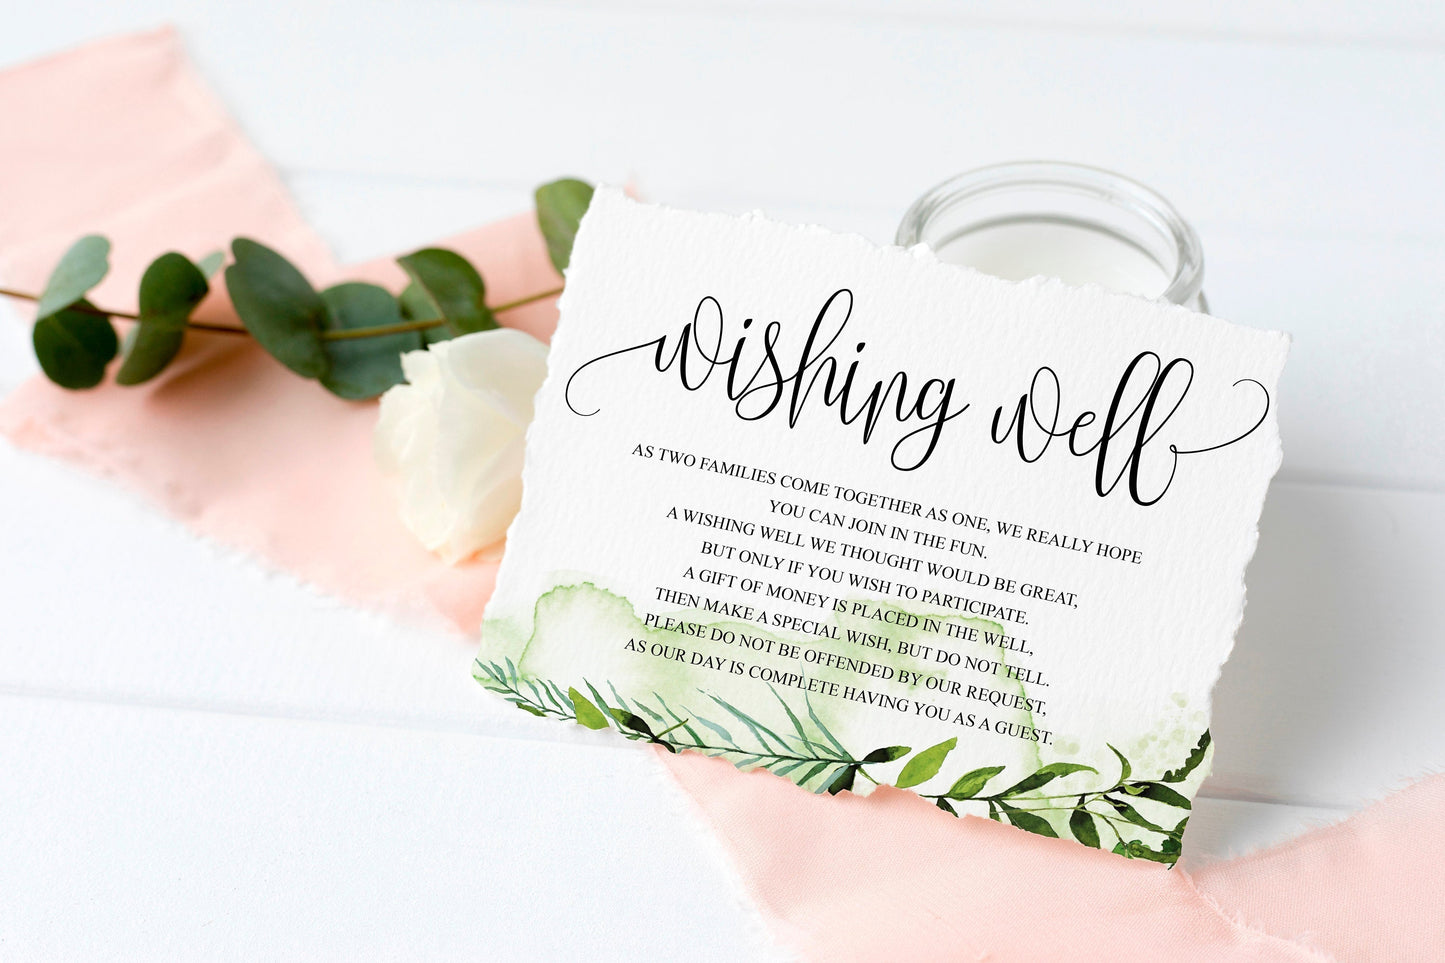 Simple Wedding Wishing Well Card Template,Instant Download, Editable Wishing, Wishing well Cards Insert, Greenery,Rustic  - Melissa TAGS | TY | INSERTS SAVVY PAPER CO